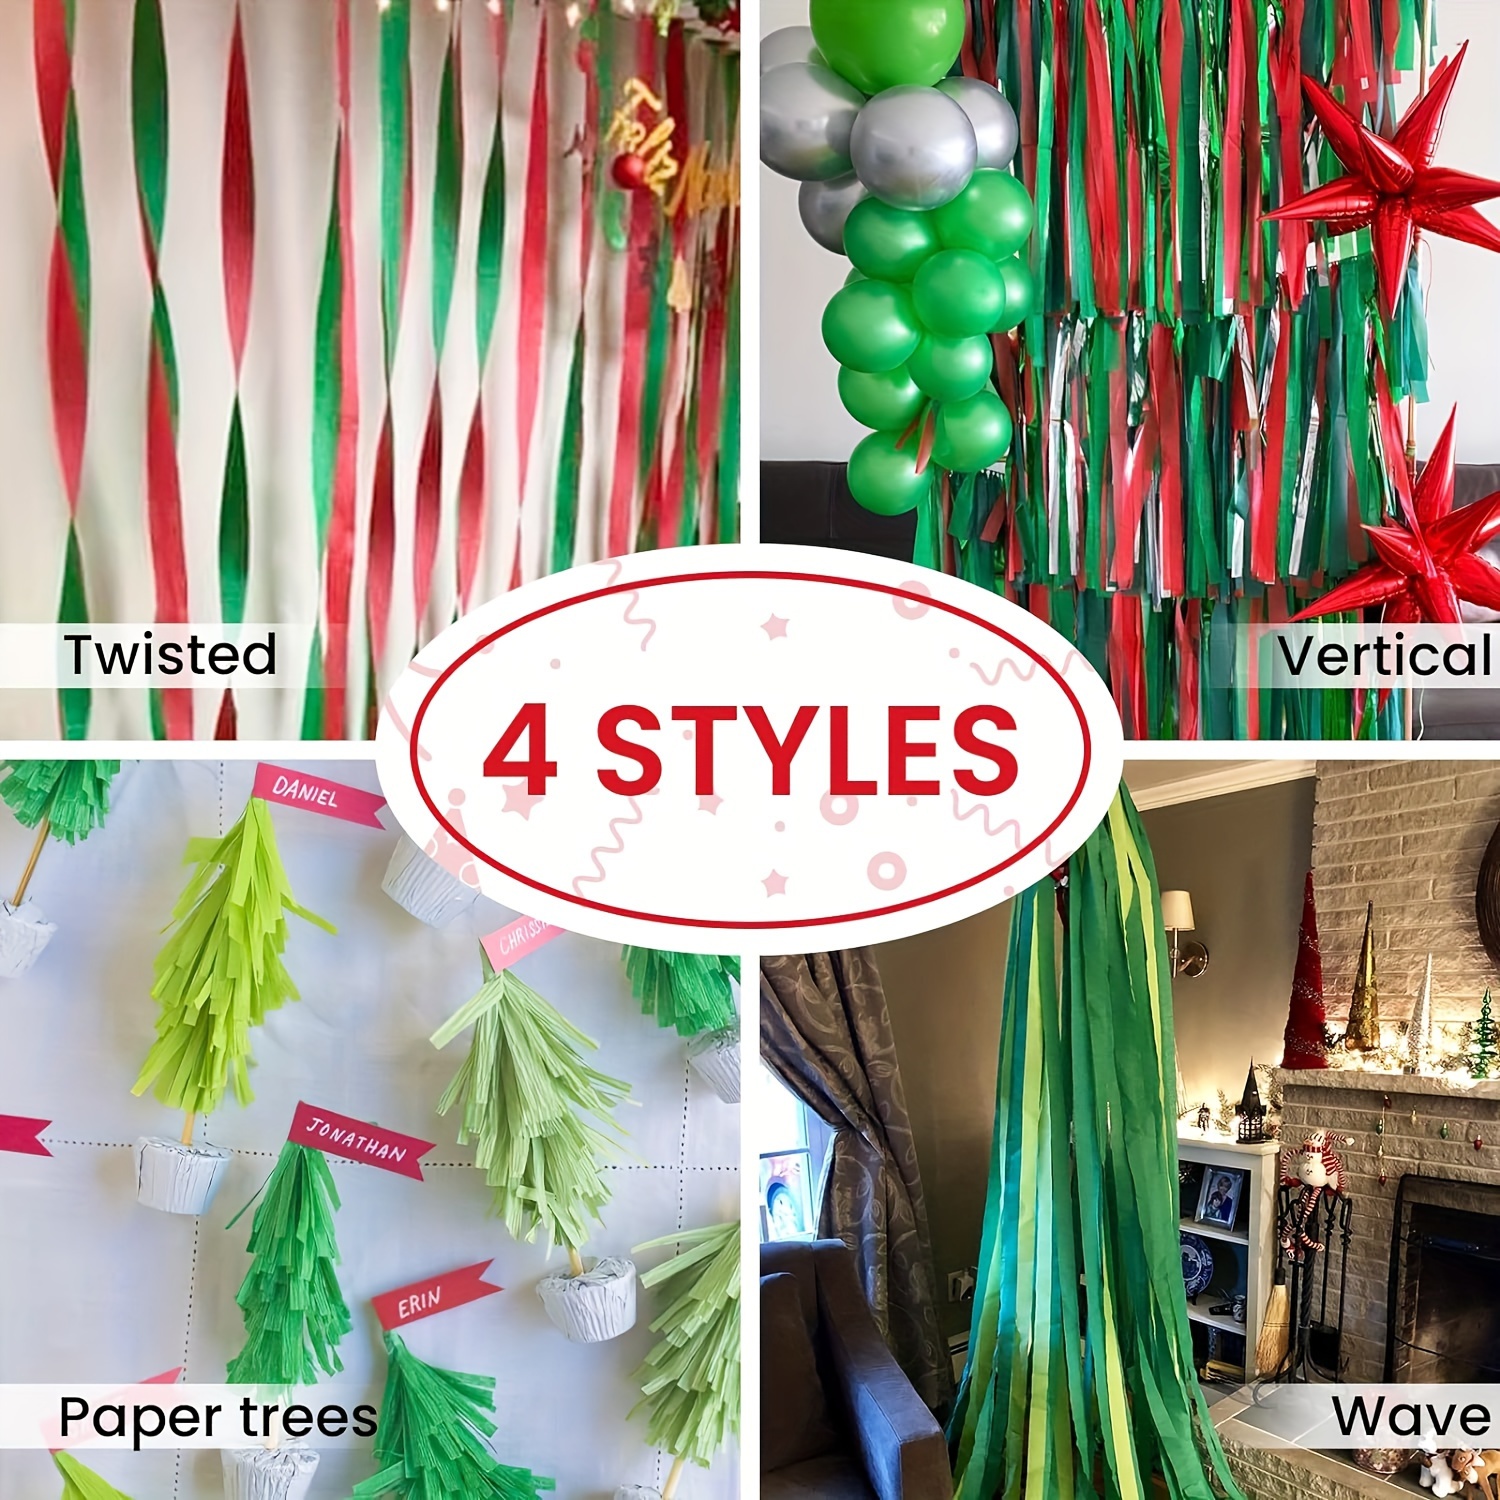 PartyWoo Crepe Paper Streamers 6 Rolls 492ft, Pack of Crepe Paper Green  Streamers Party Decorations, Crepe Paper for Birthday Decorations, Party